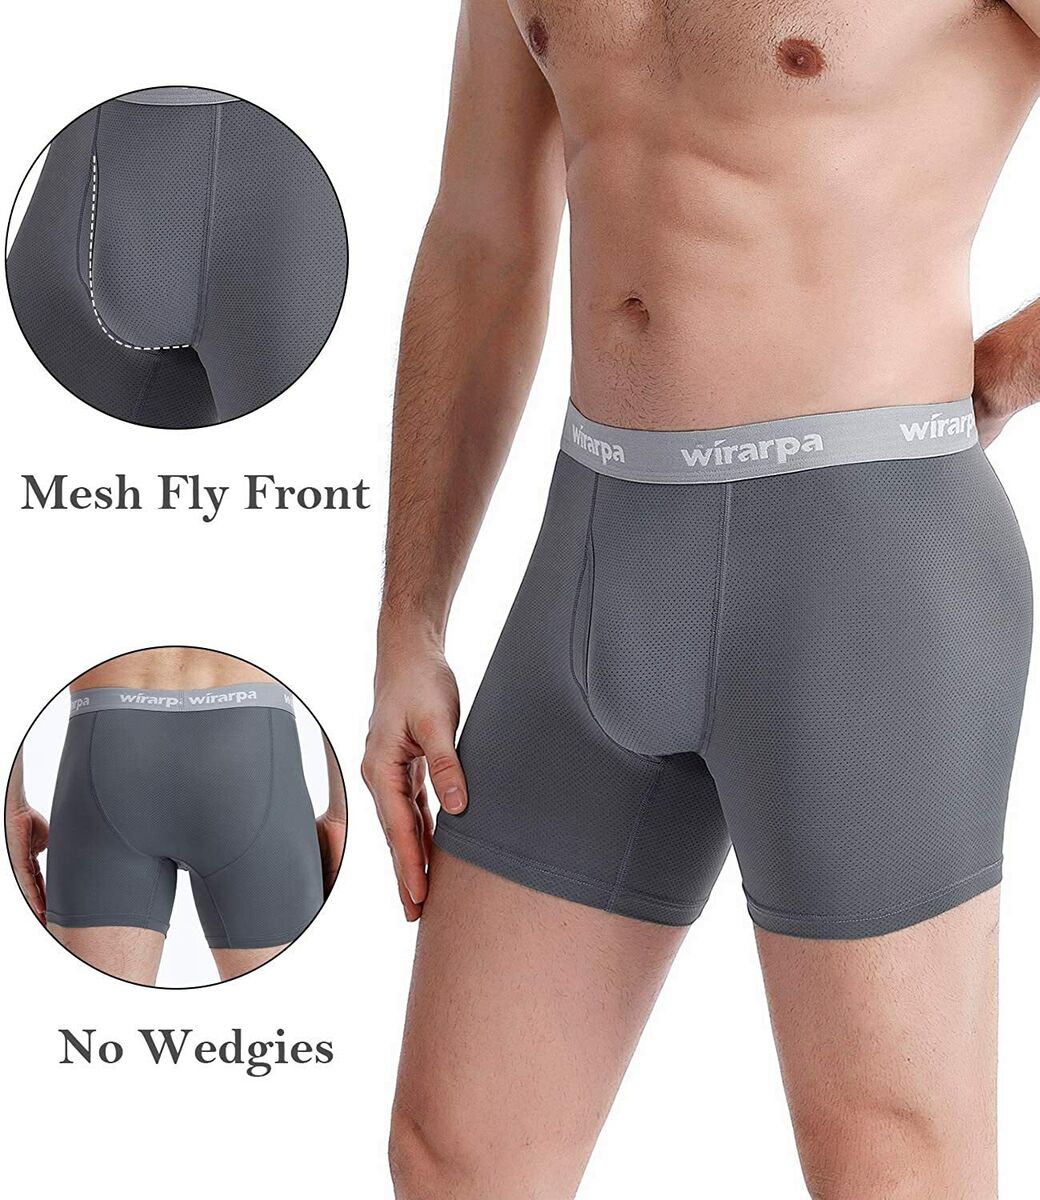 alen karaselimovic recommends Stretchy Underwear For Wedgies